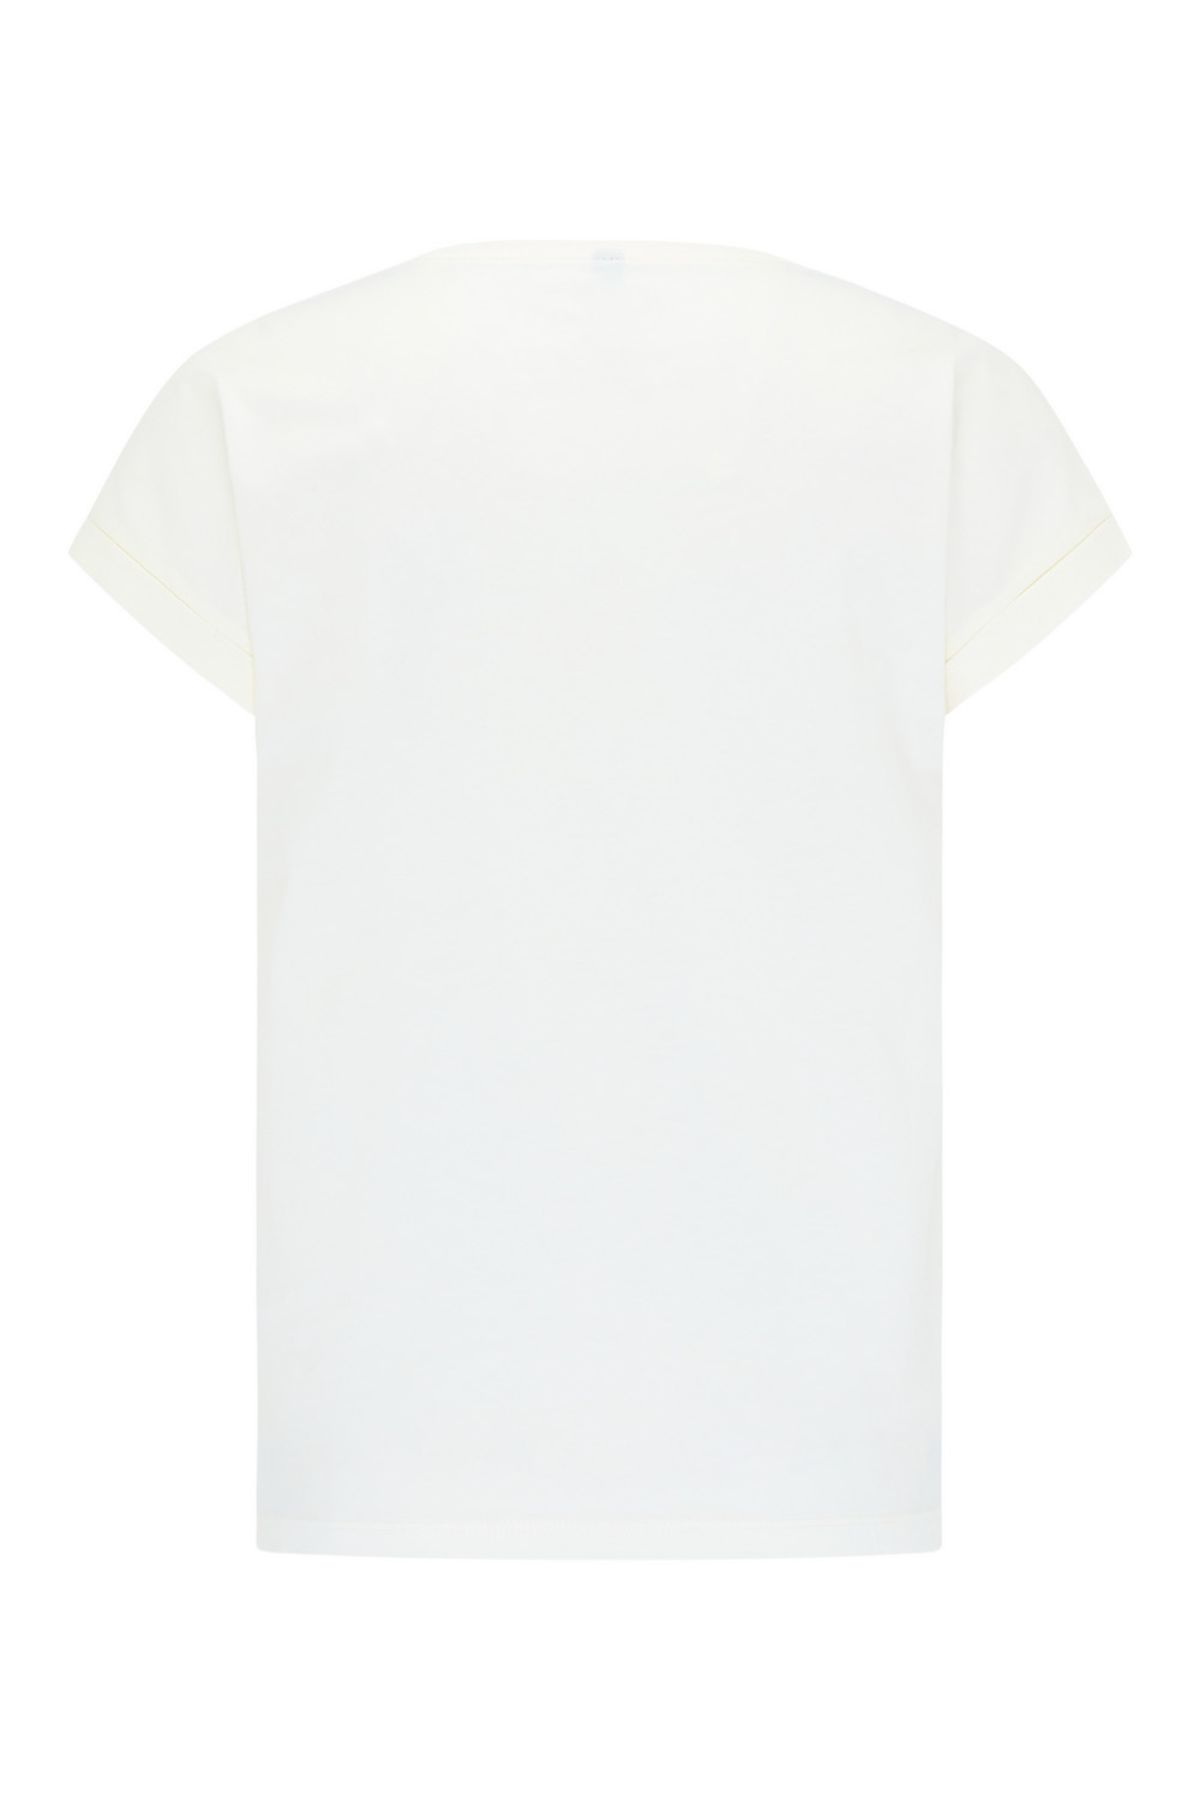 Tranquillo top jersey off white